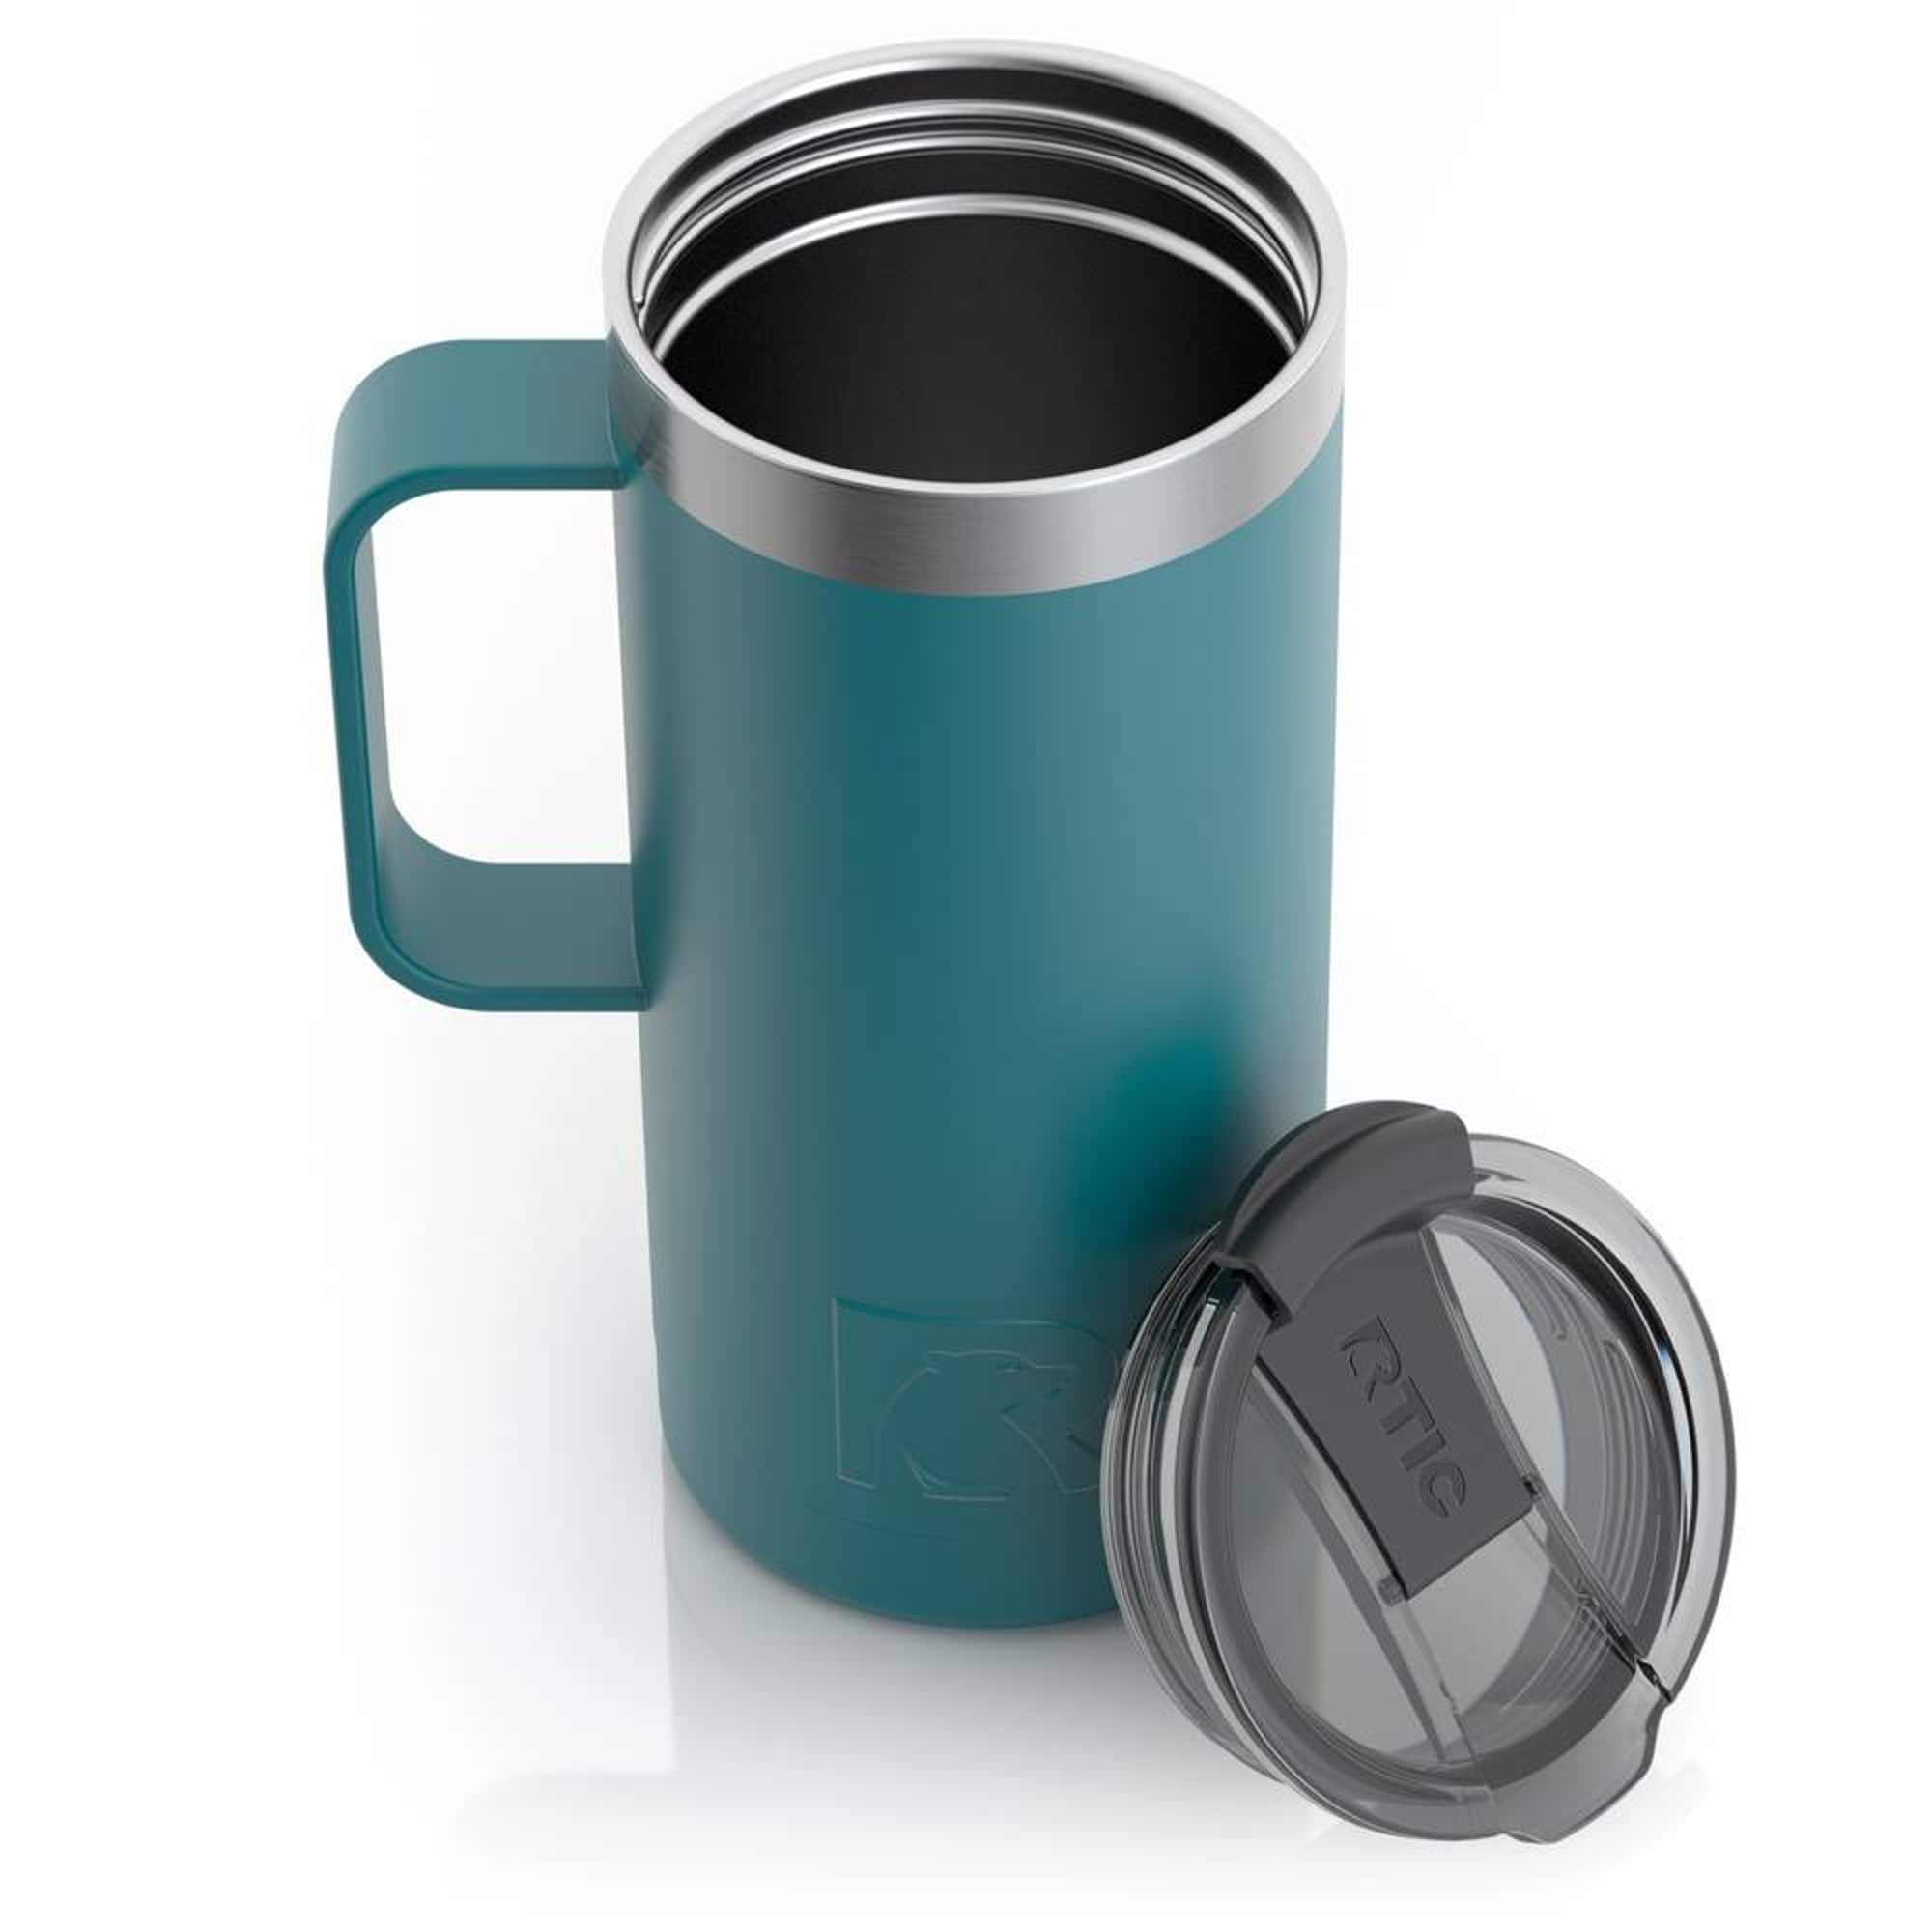 RTIC Outdoors 20-fl oz Stainless Steel Insulated Travel Mug